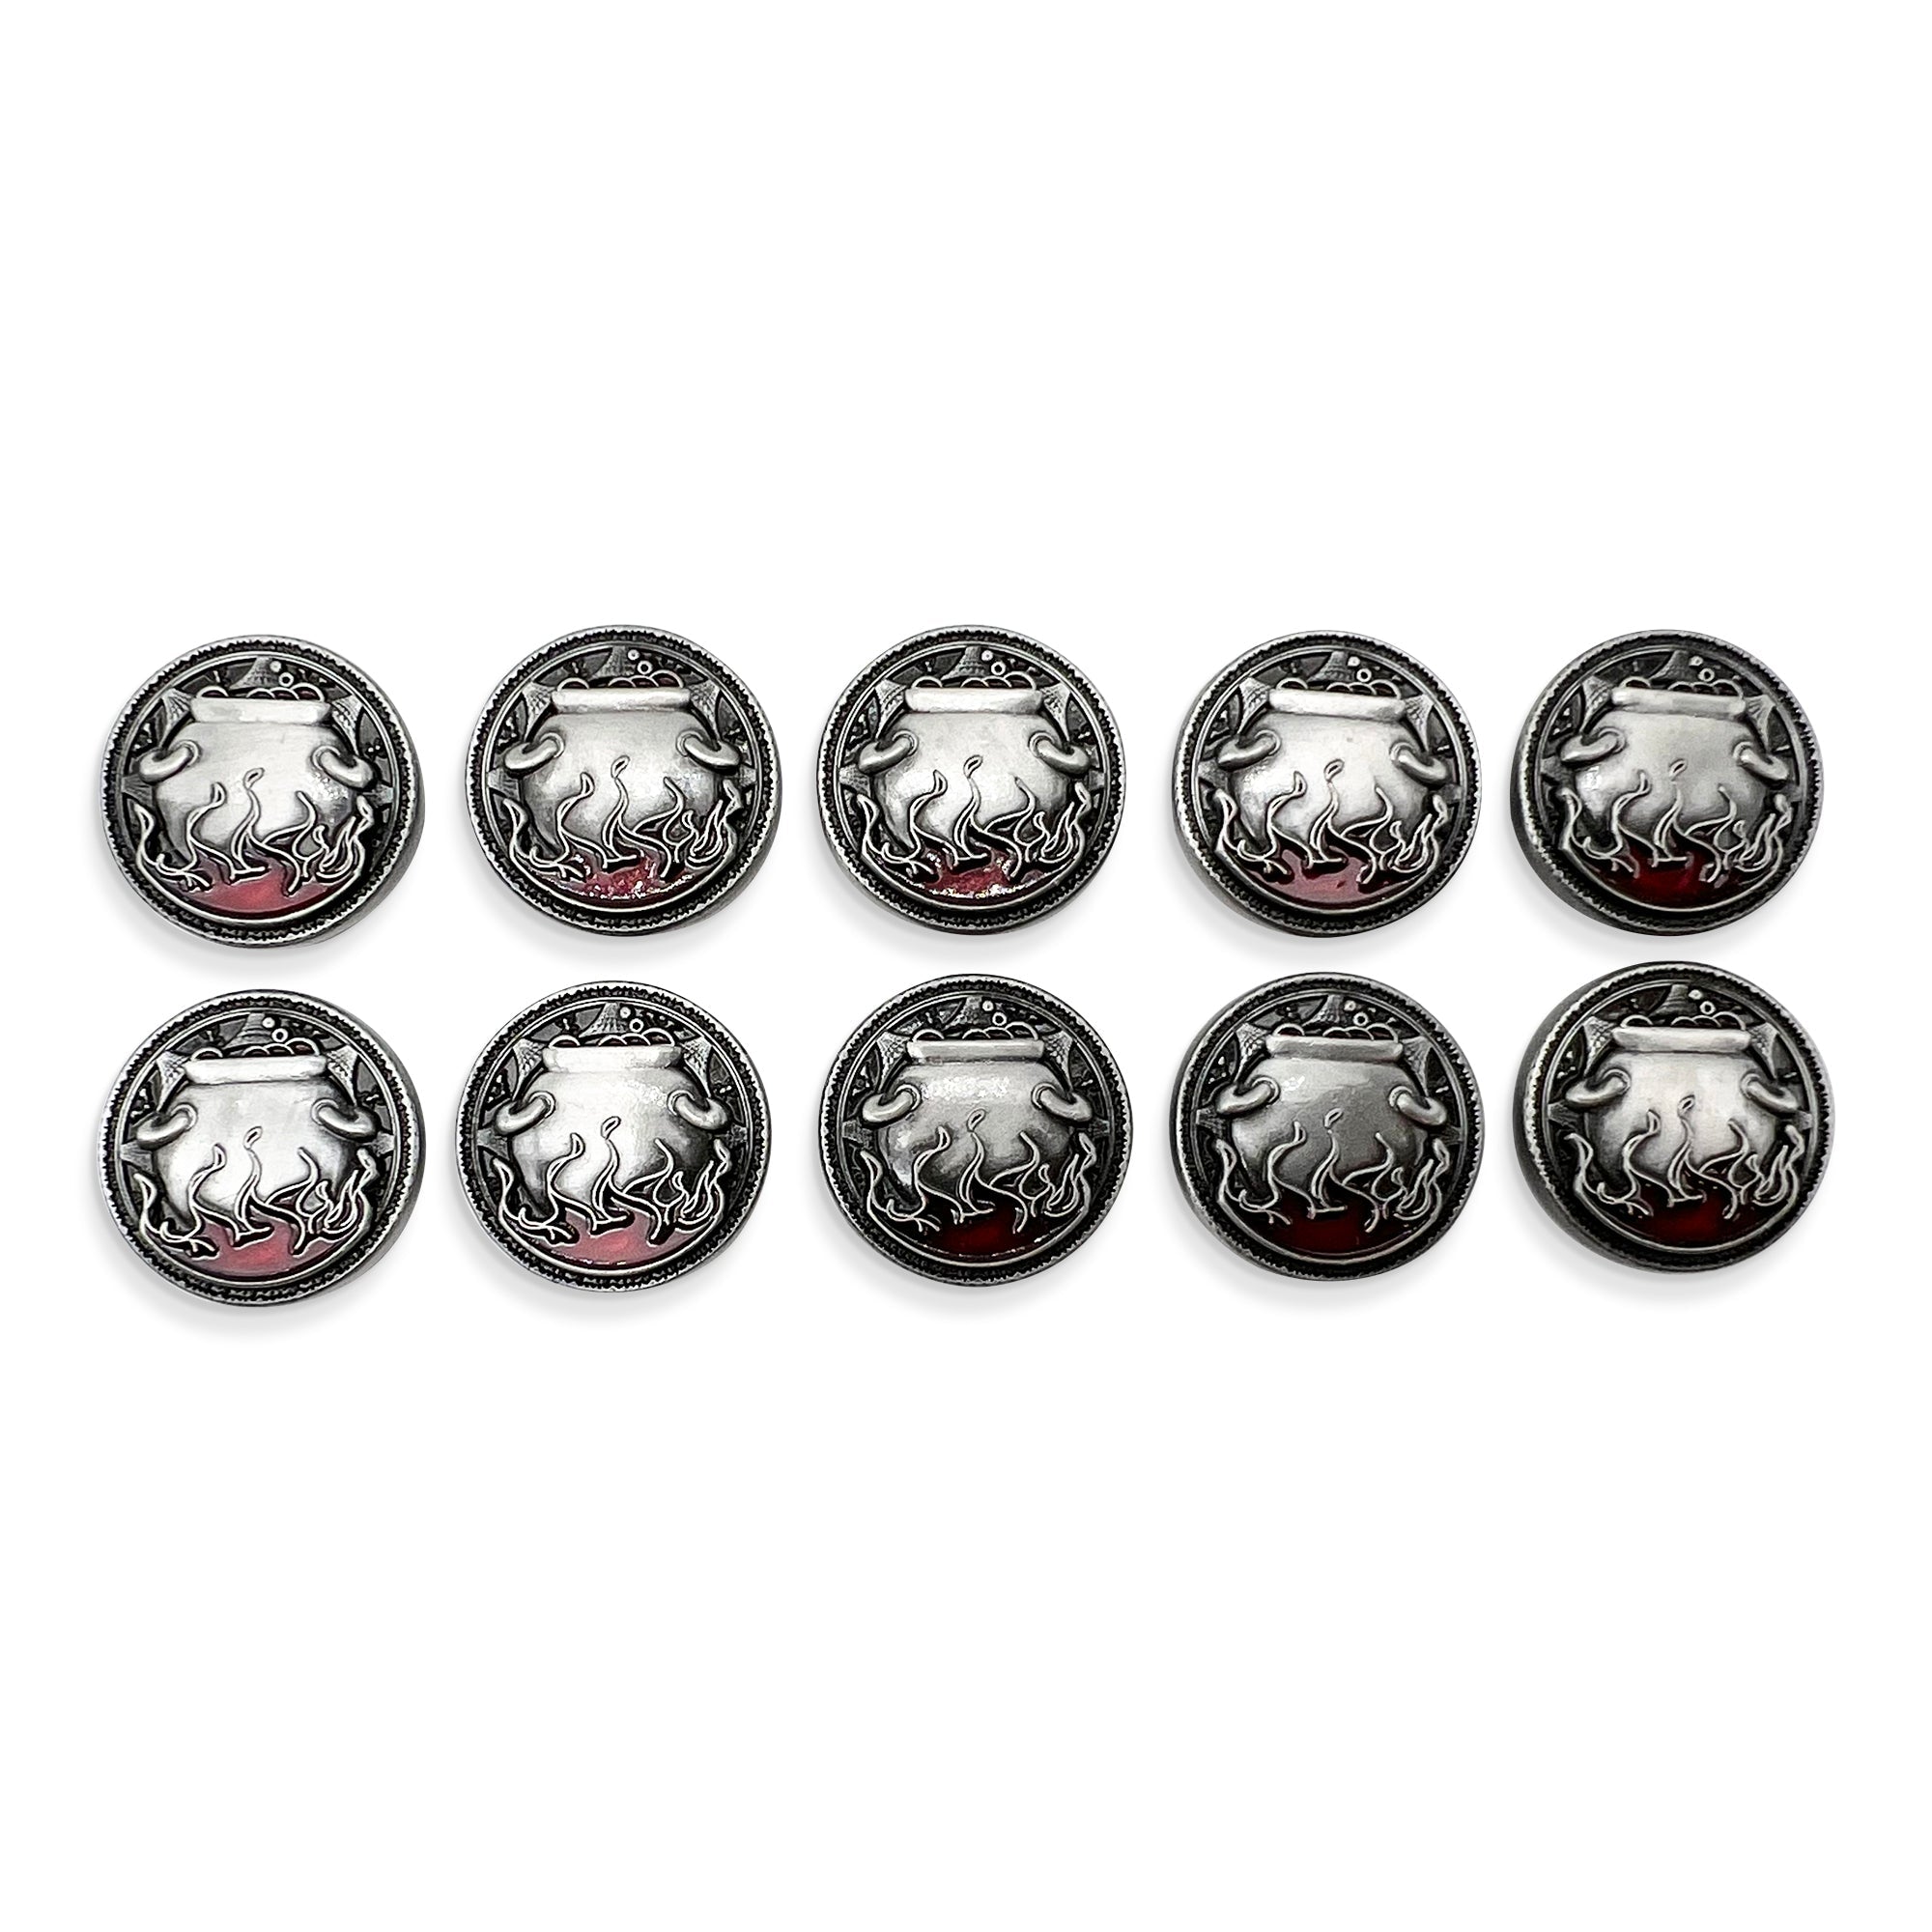 Profession Coins - Witch Metal Coins Set of 10 - NOR 03419